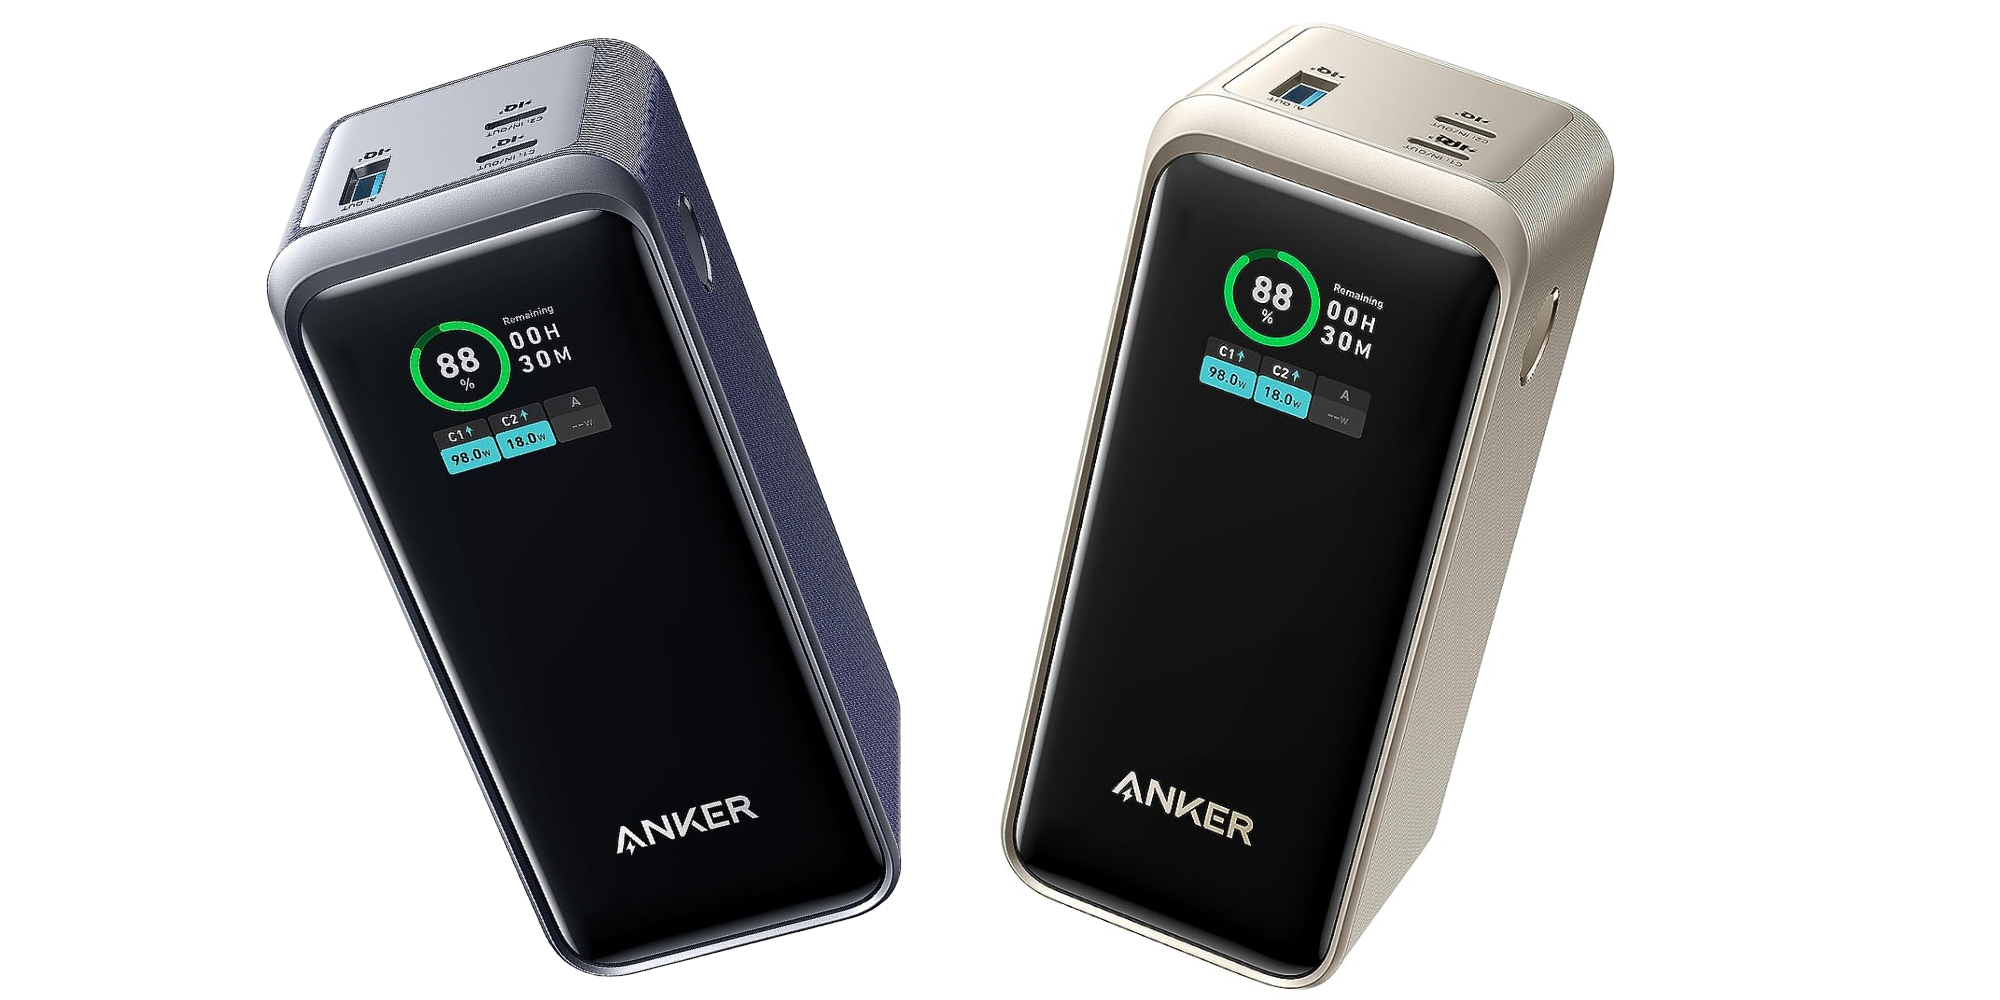 Anker's new Prime 20,000mAh Power Bank with 200W output hits $110